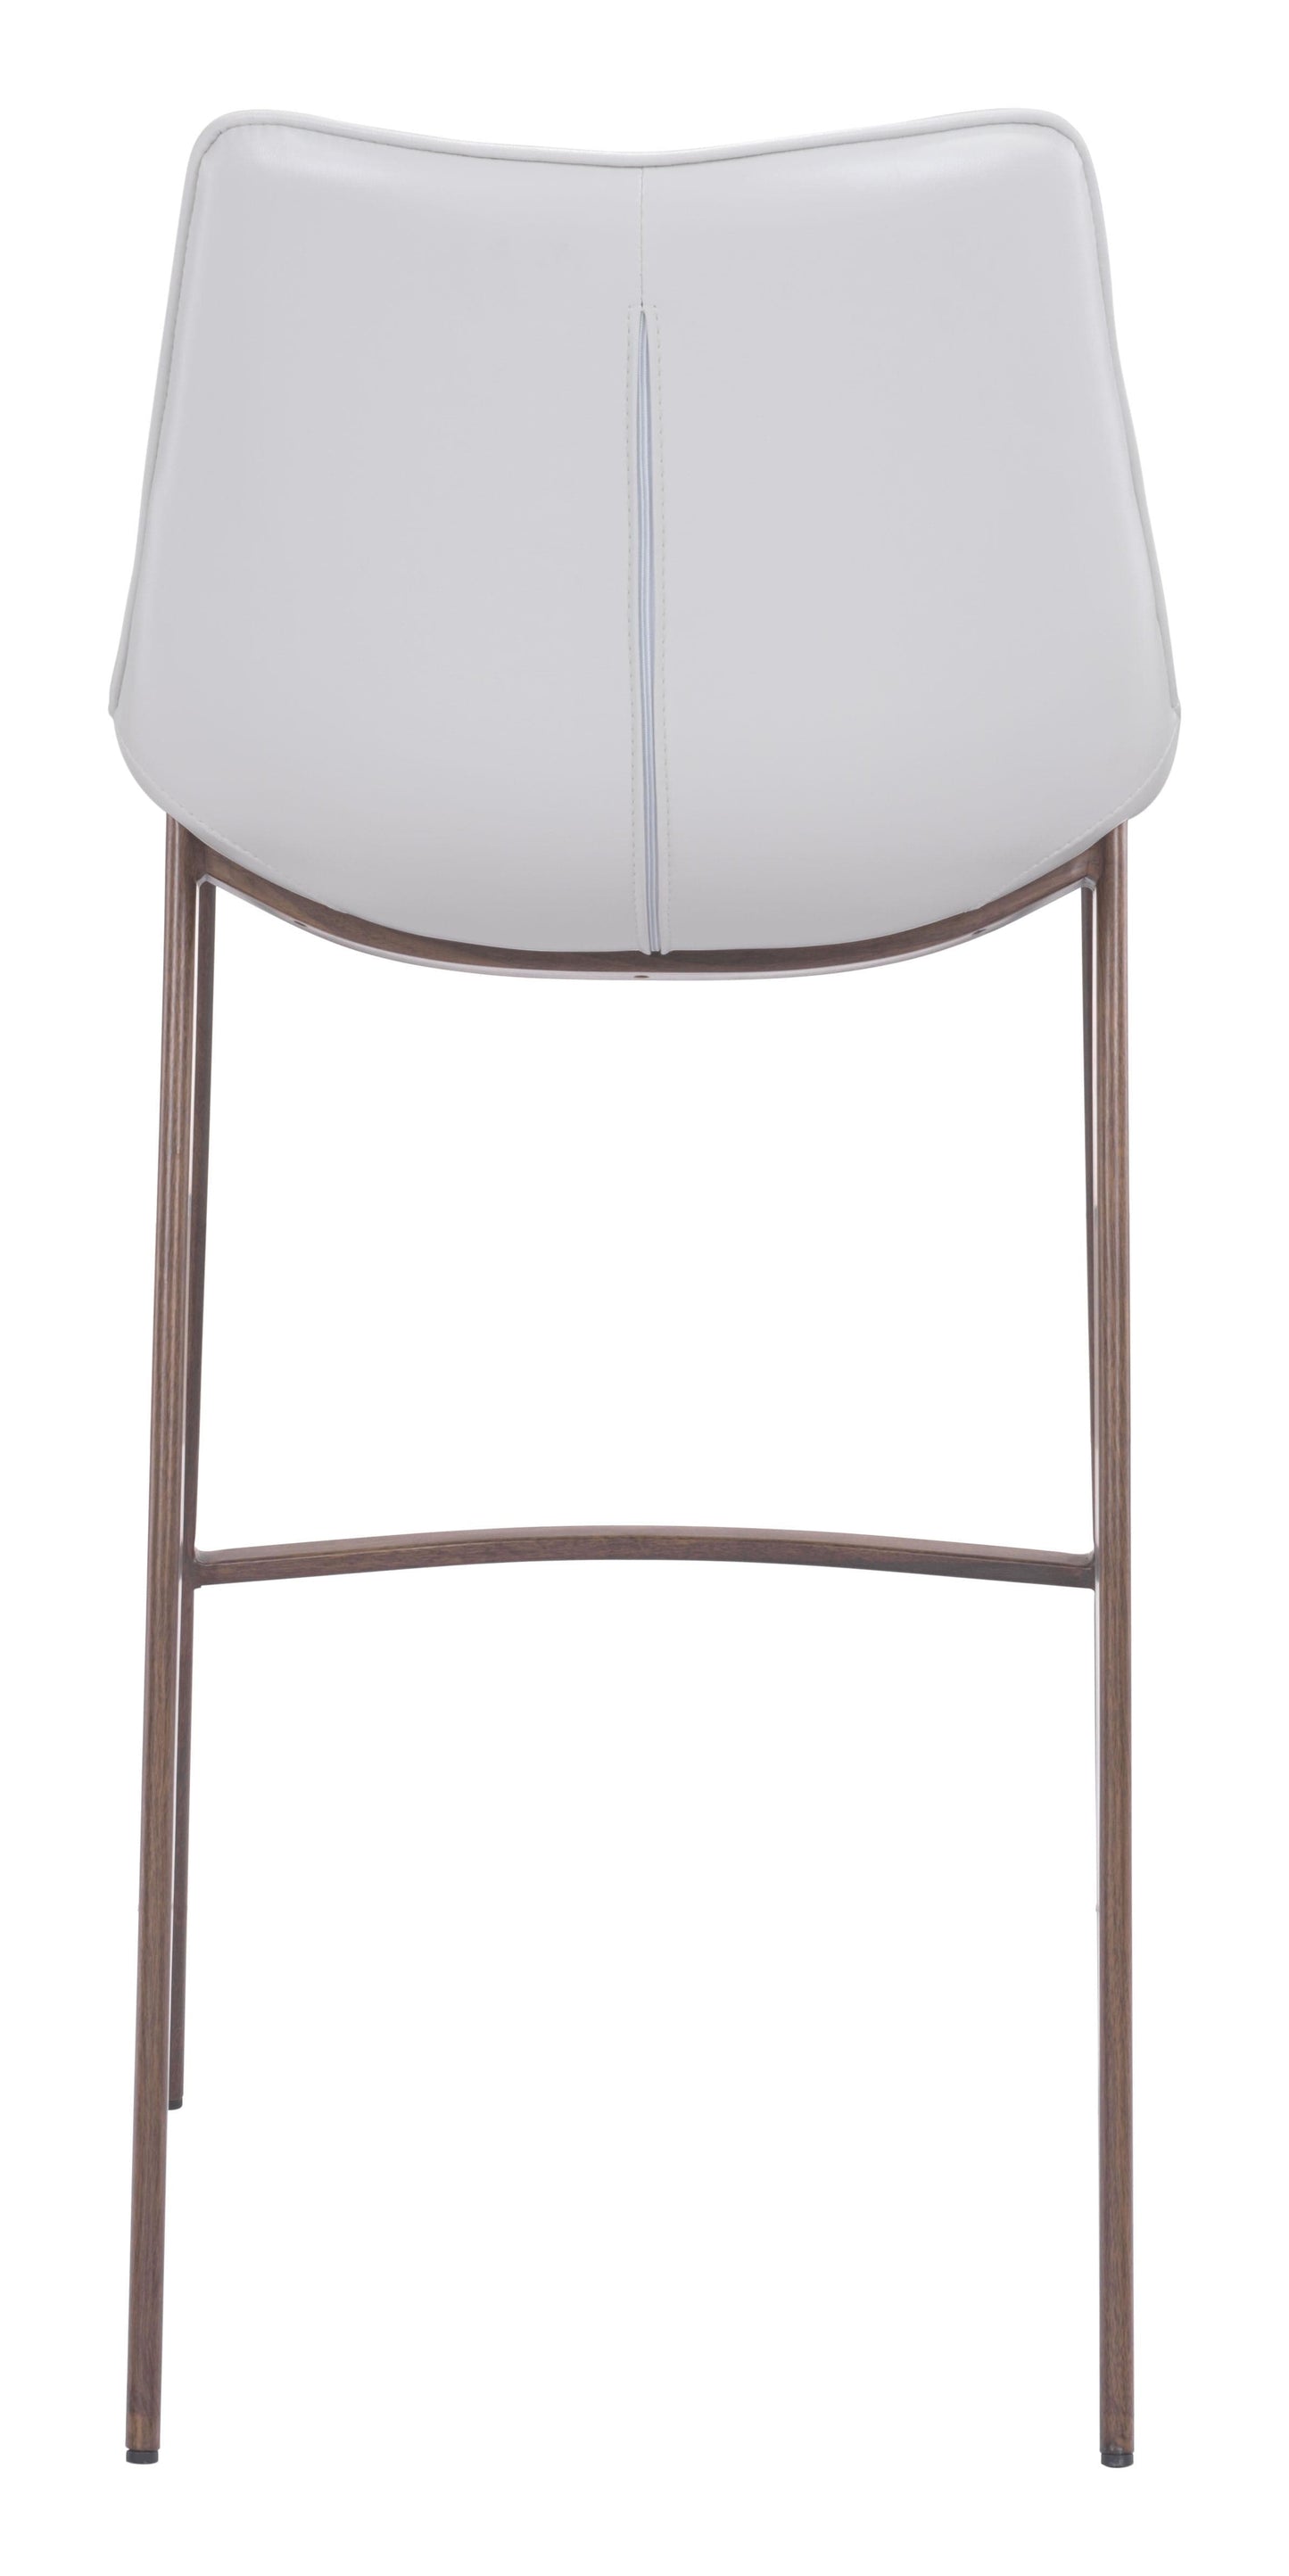 Back View of Modern Stool